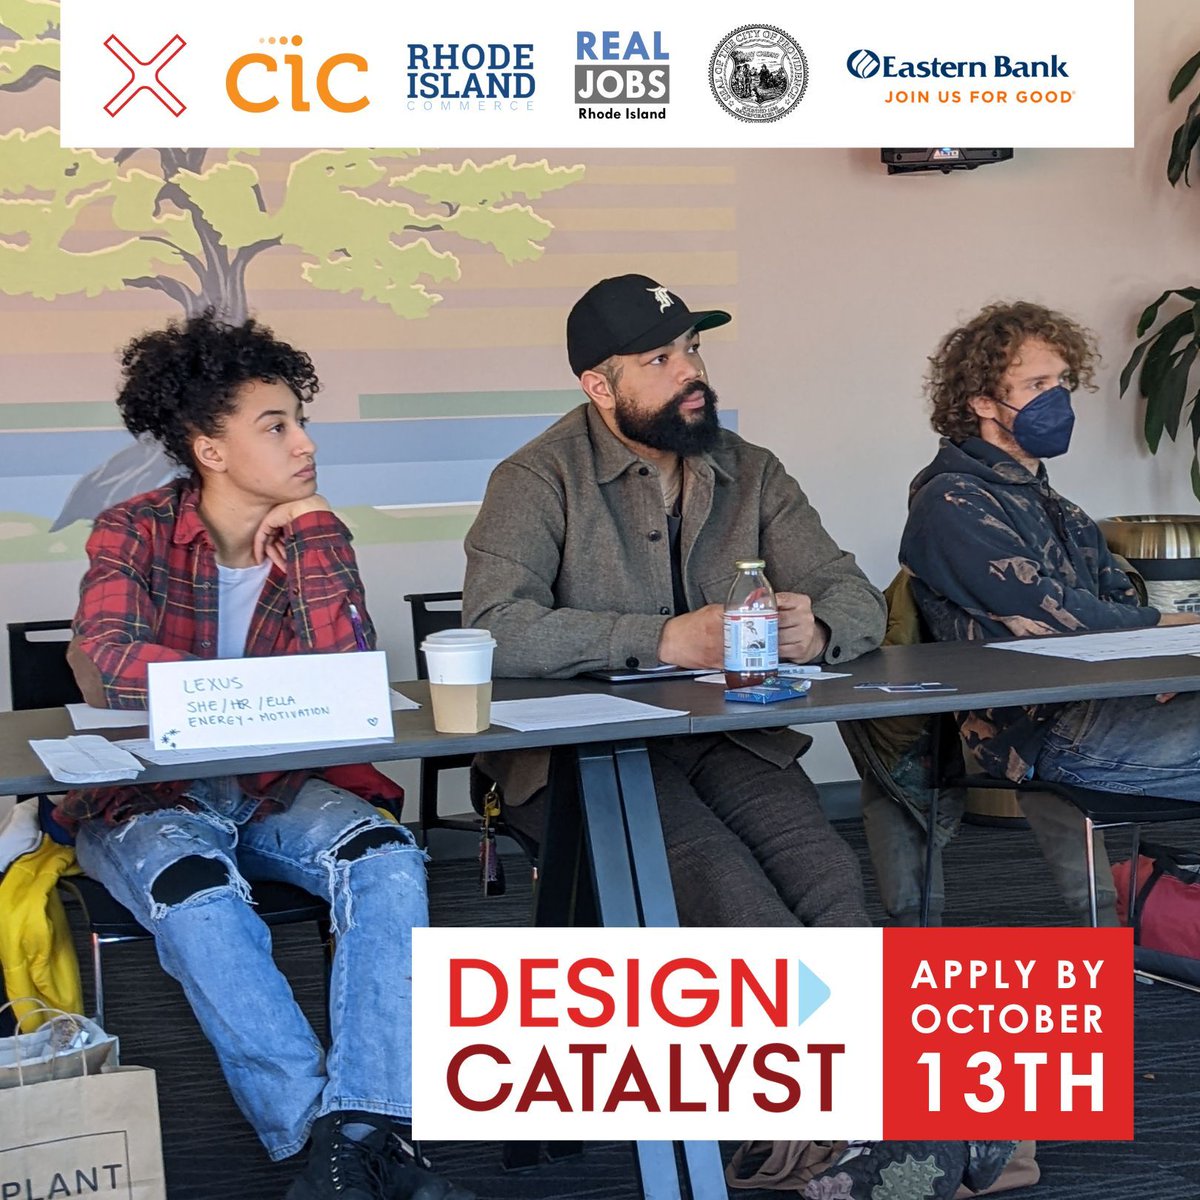 Are you a small RI creative business owner looking to level up your business? The CATALYST program offers seed capital, business mentorship, professional development training, & peer networking opportunities. Learn more & apply at buff.ly/46kFeRN. Apps due 10/13.